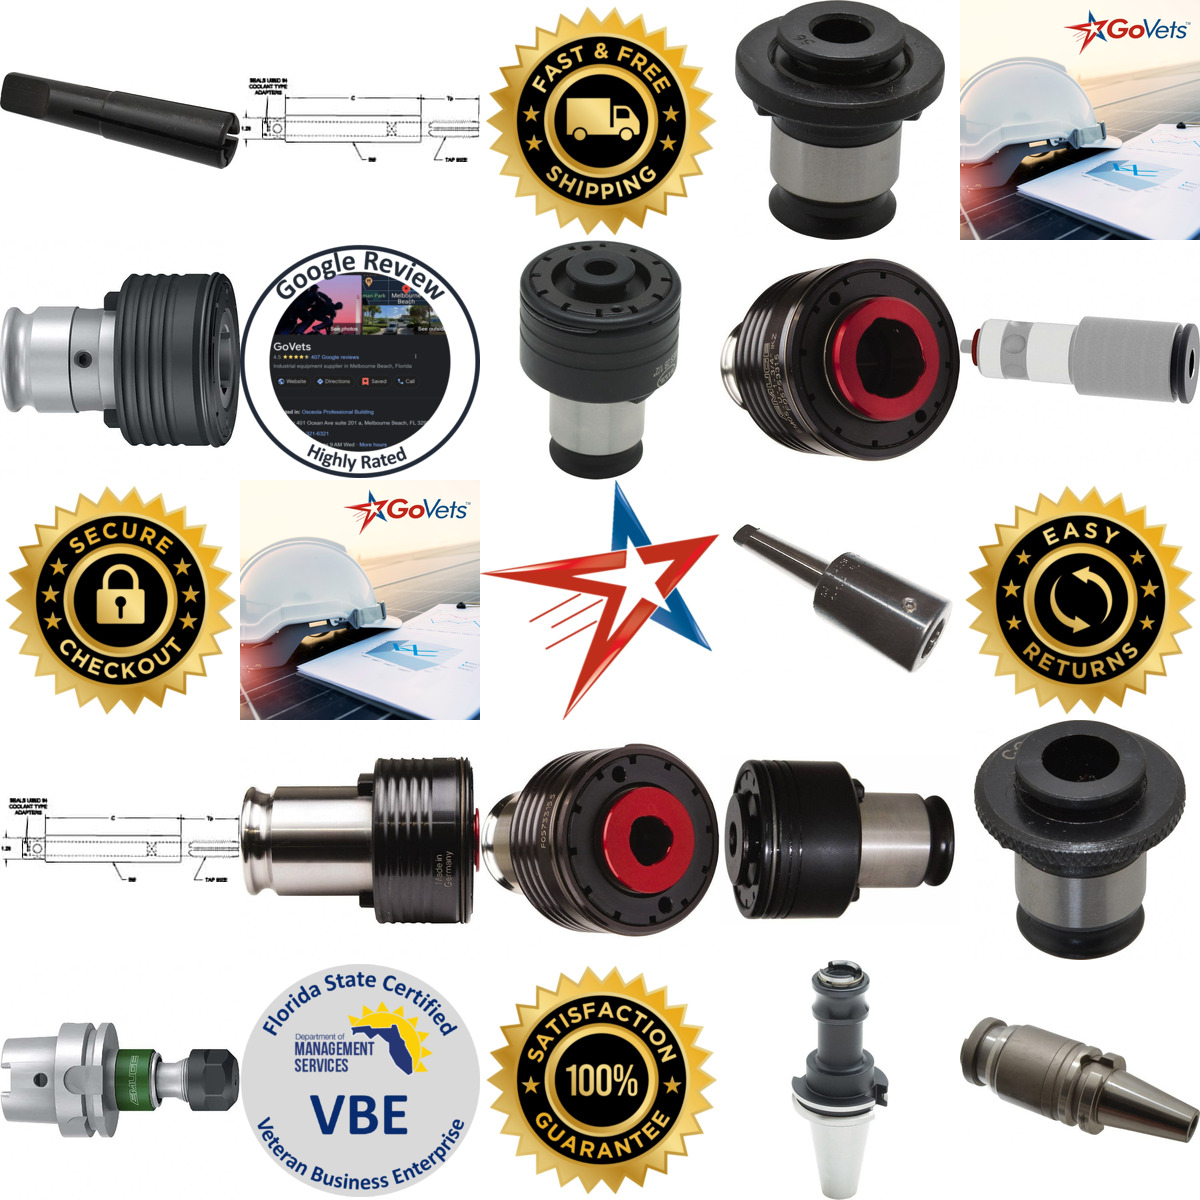 A selection of Tapping Heads and Holders products on GoVets